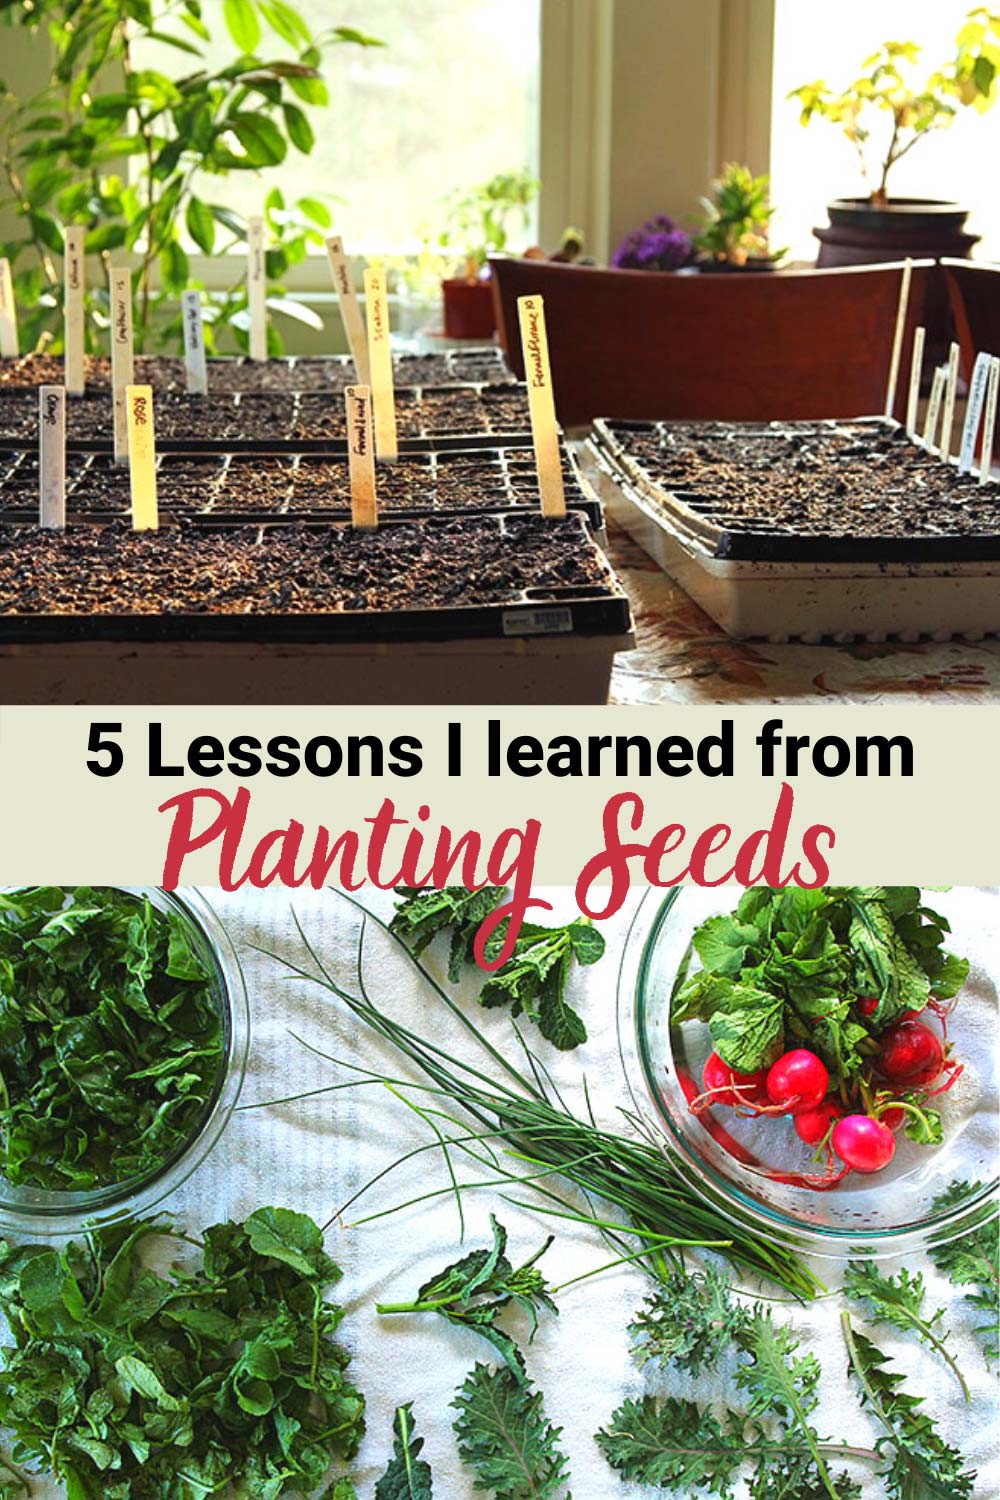 5 Lessons Planting Seeds Taught Me About Life